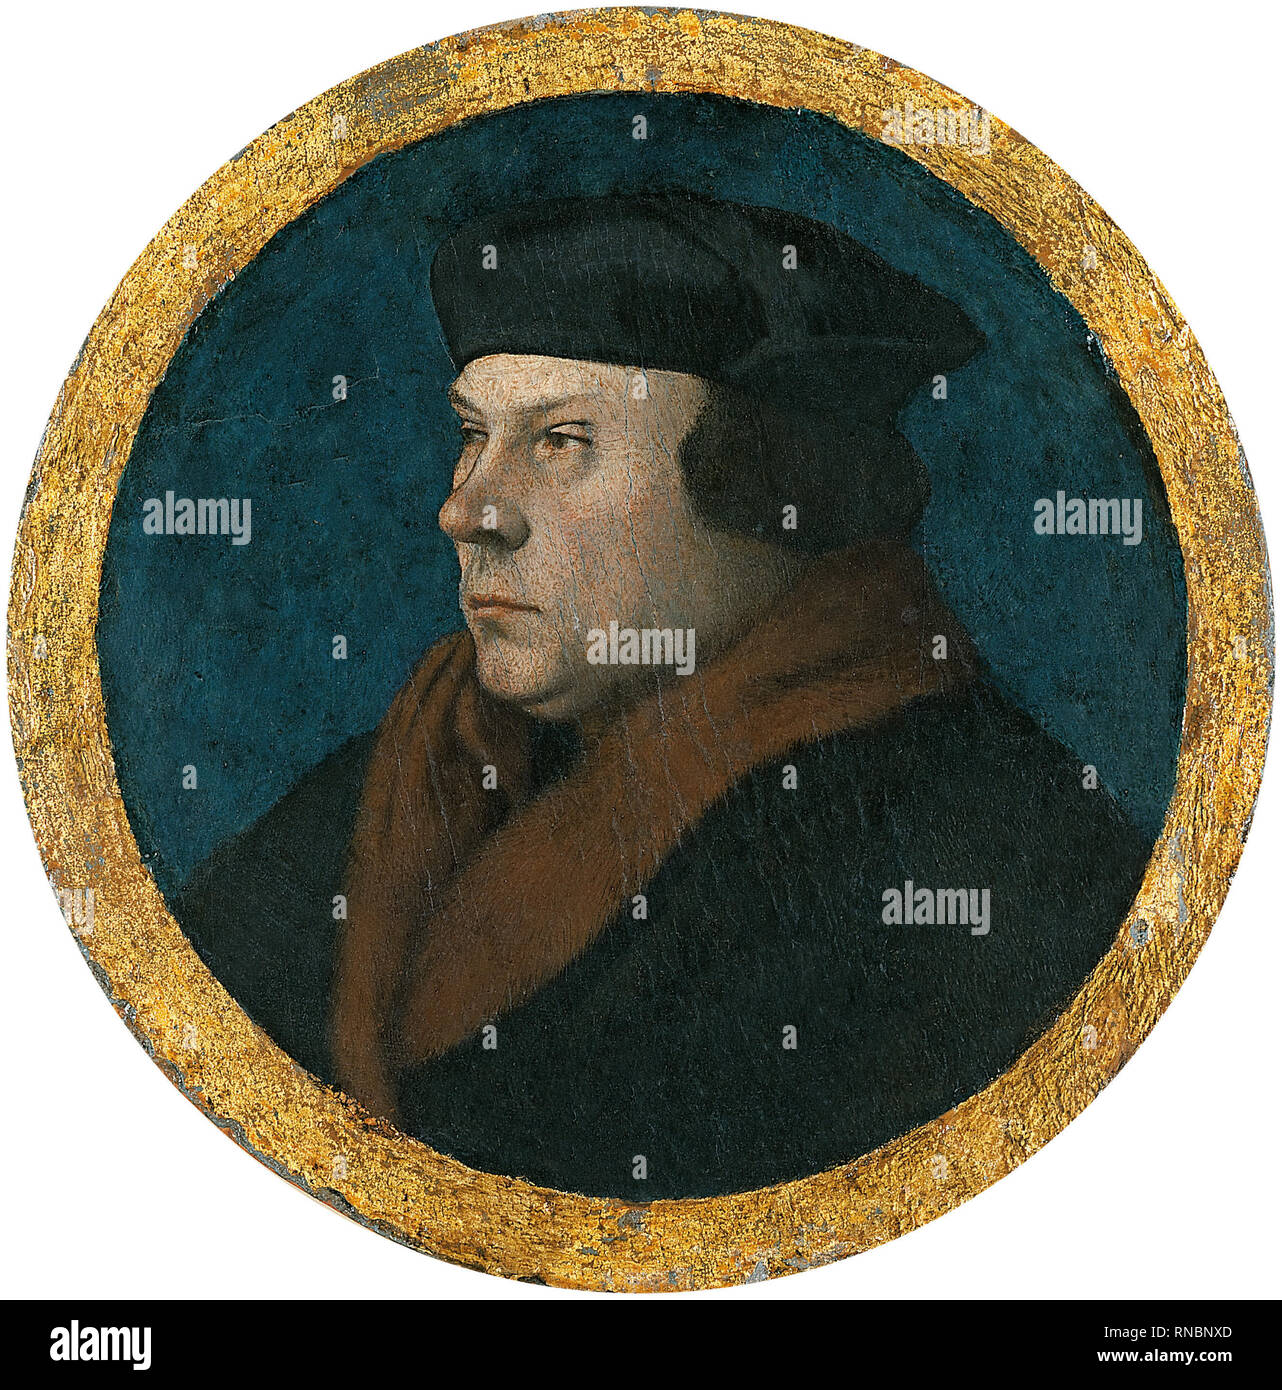 Hans the Younger (attributed to) Holbein (Augsburg, 1497/98 - London, 1543). Portrait of Thomas Cromwell (s.f). Oil on panel. 11 cm (diameter). Museum: Museo Nacional Thyssen-Bornemisza, Madrid. Stock Photo